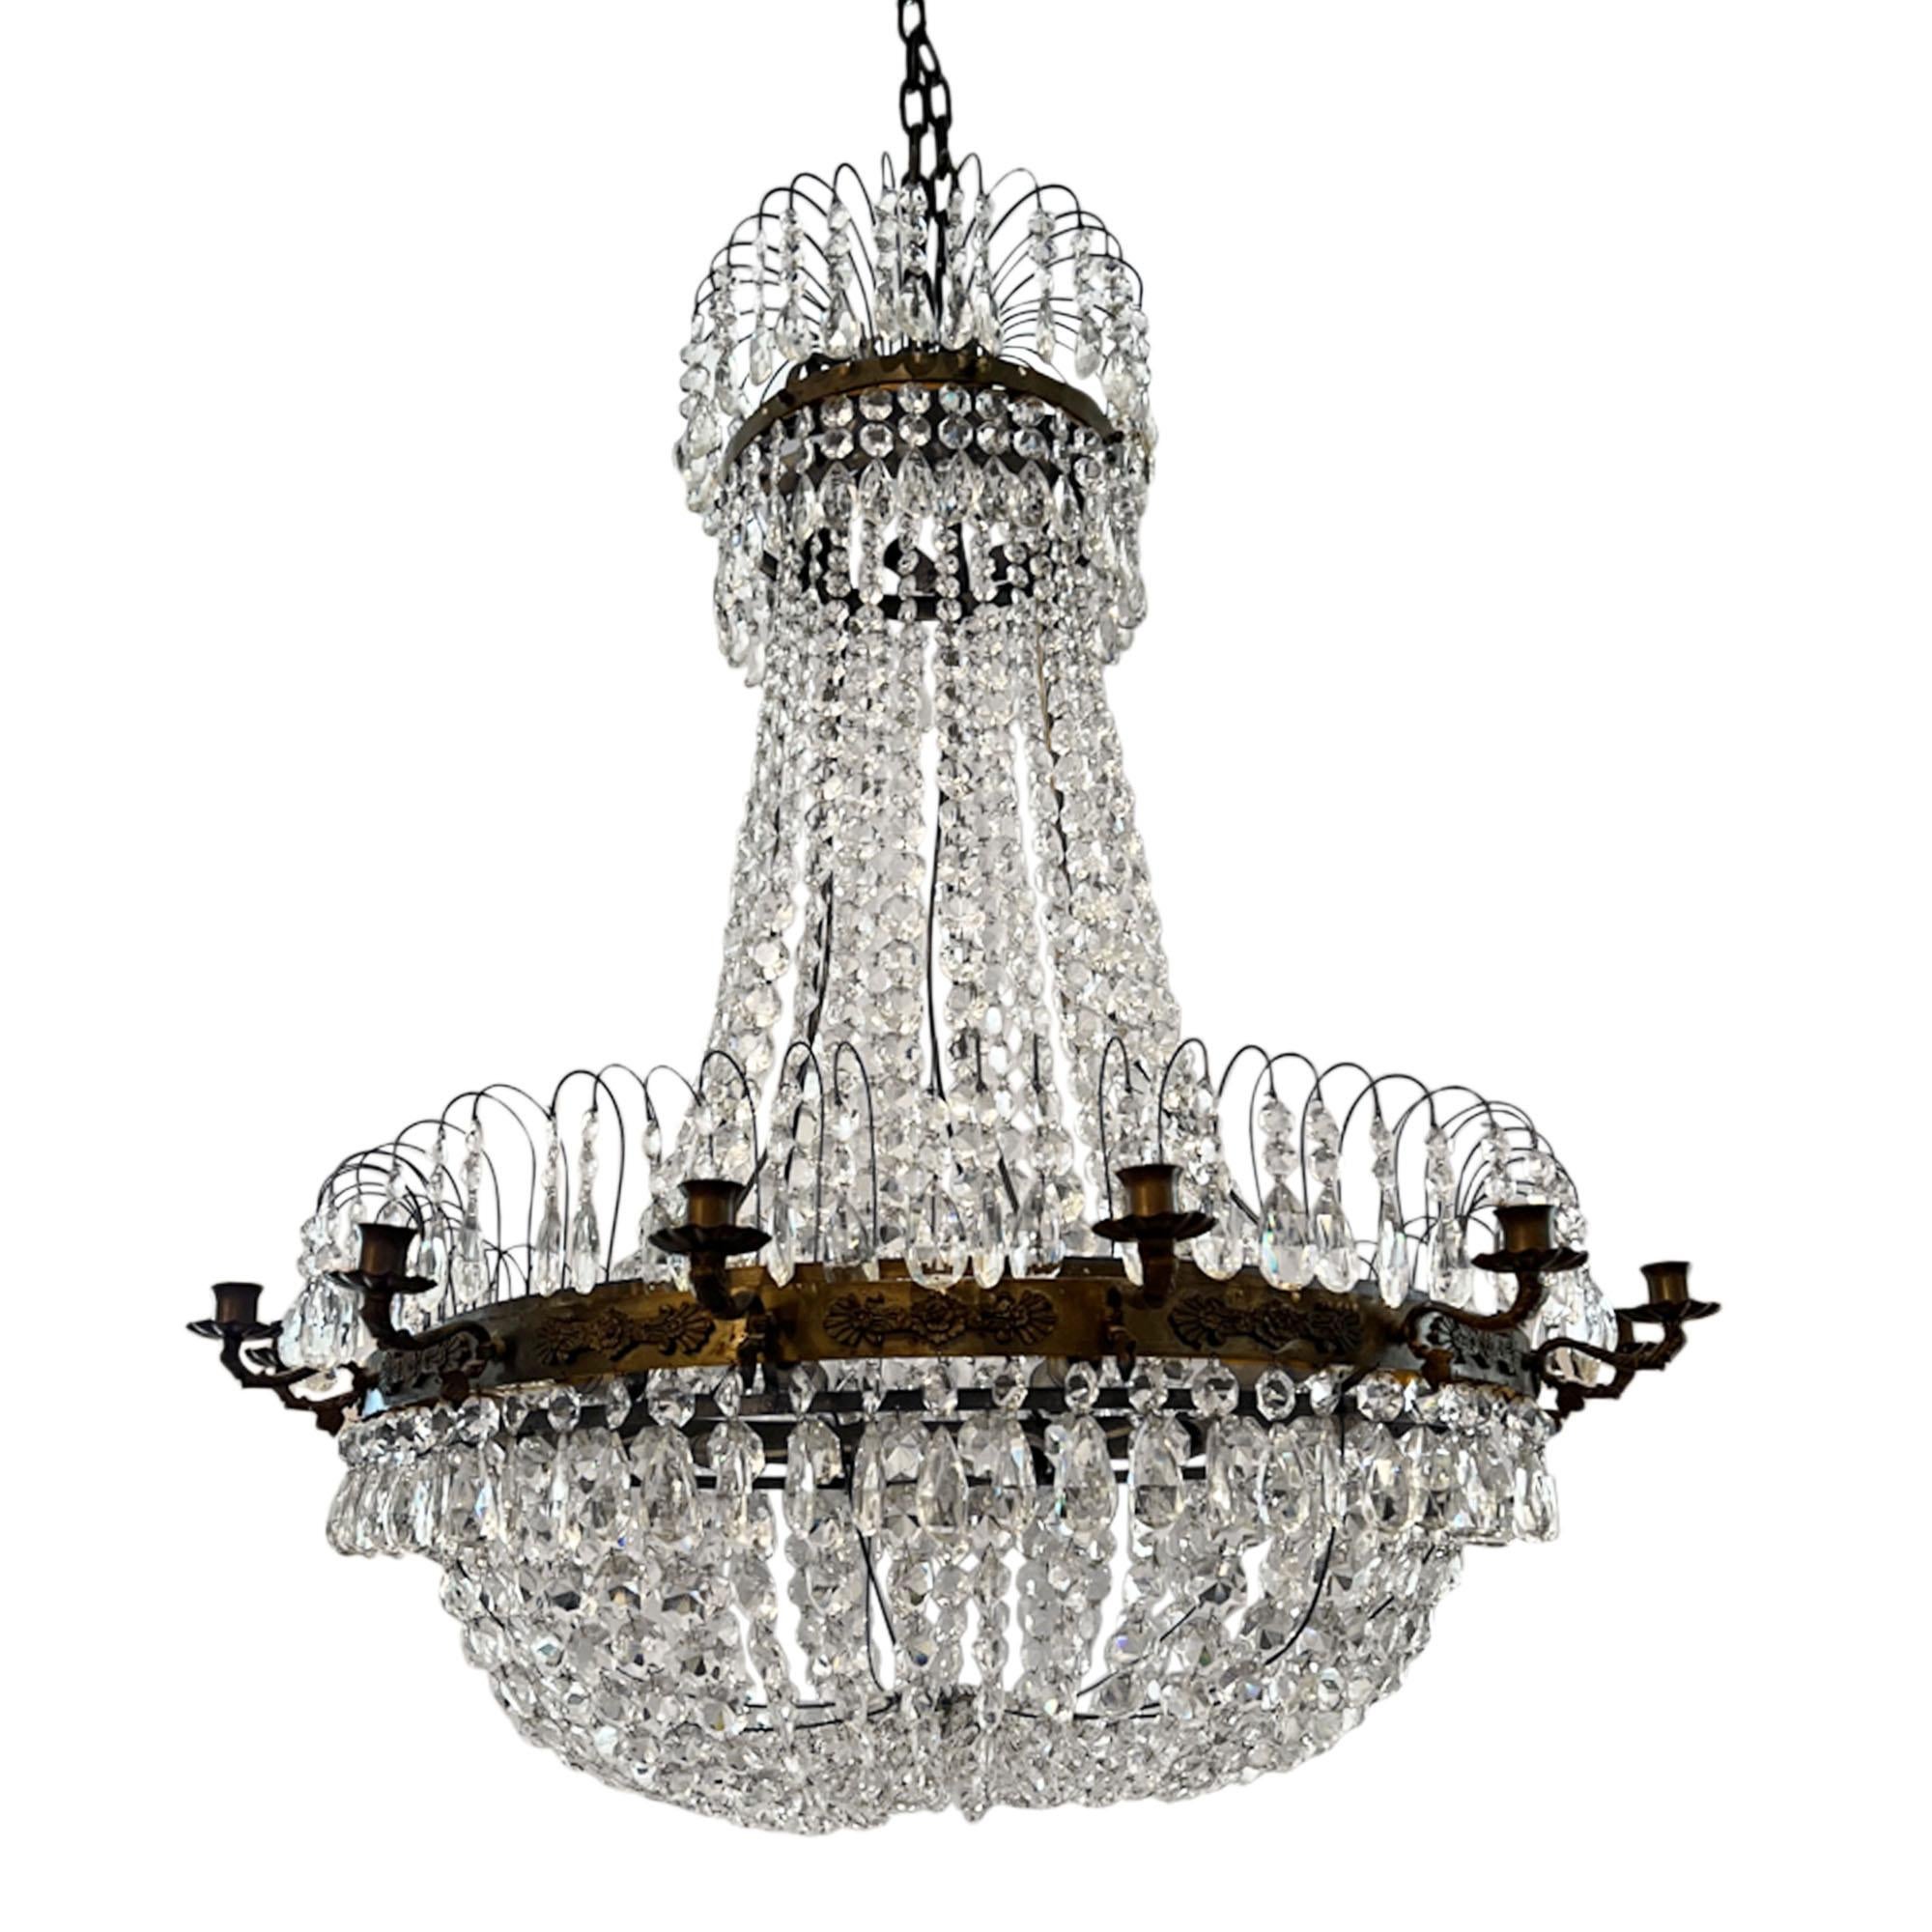 A grand basket chandelier, made in Sweden in the 1920s.

Made from bronze and crystal. 

Stunning!.